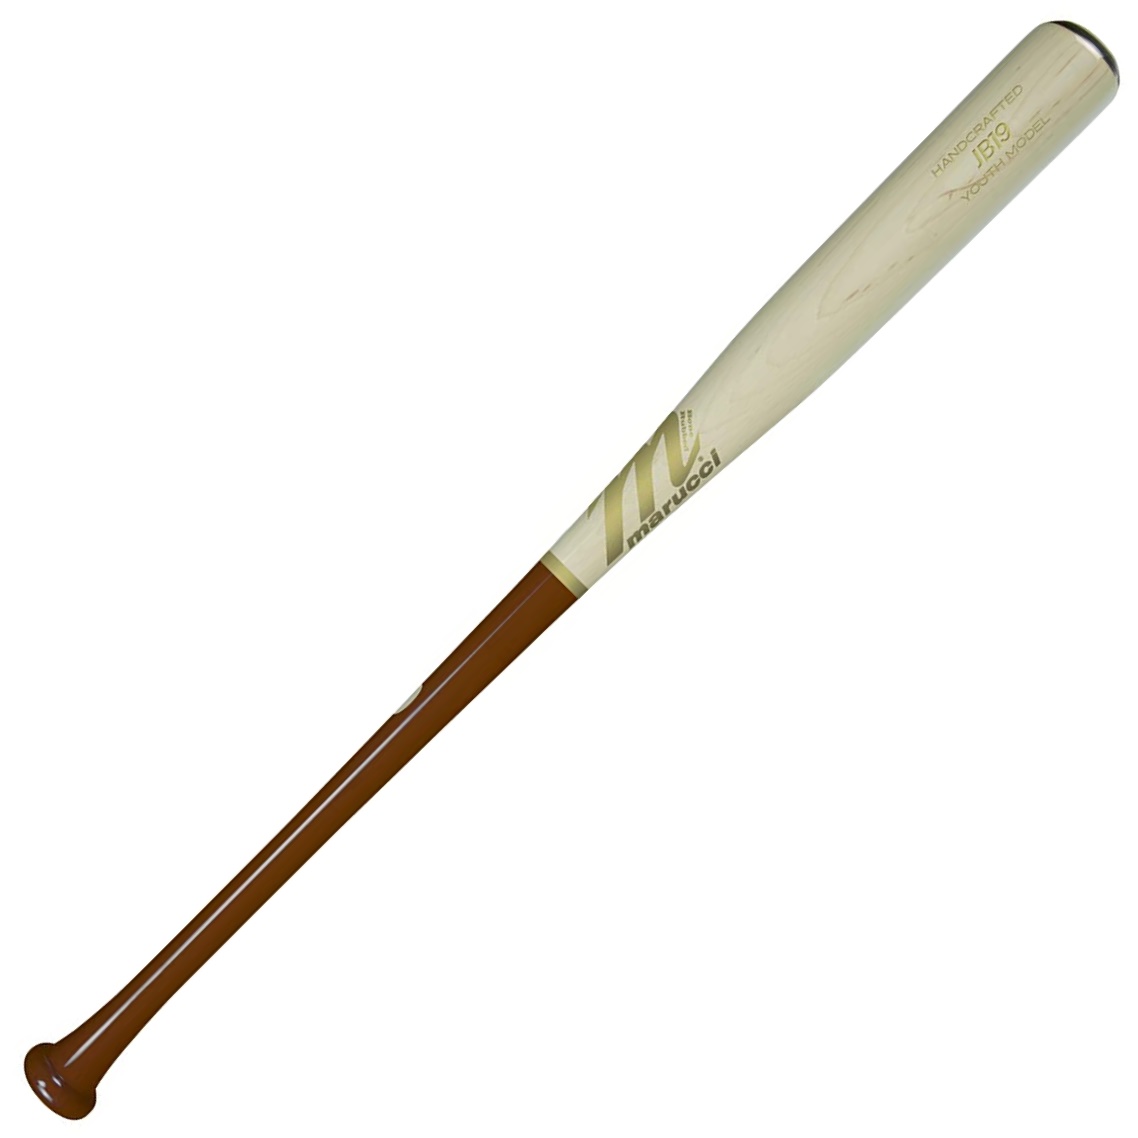 marucci-jb19-pro-youth-maple-youth-wood-baseball-bat-31-inch MYVE2JB19-WTWW-31 Marucci 840058701012 he versatile bat for the versatile hitter. We know your kind.